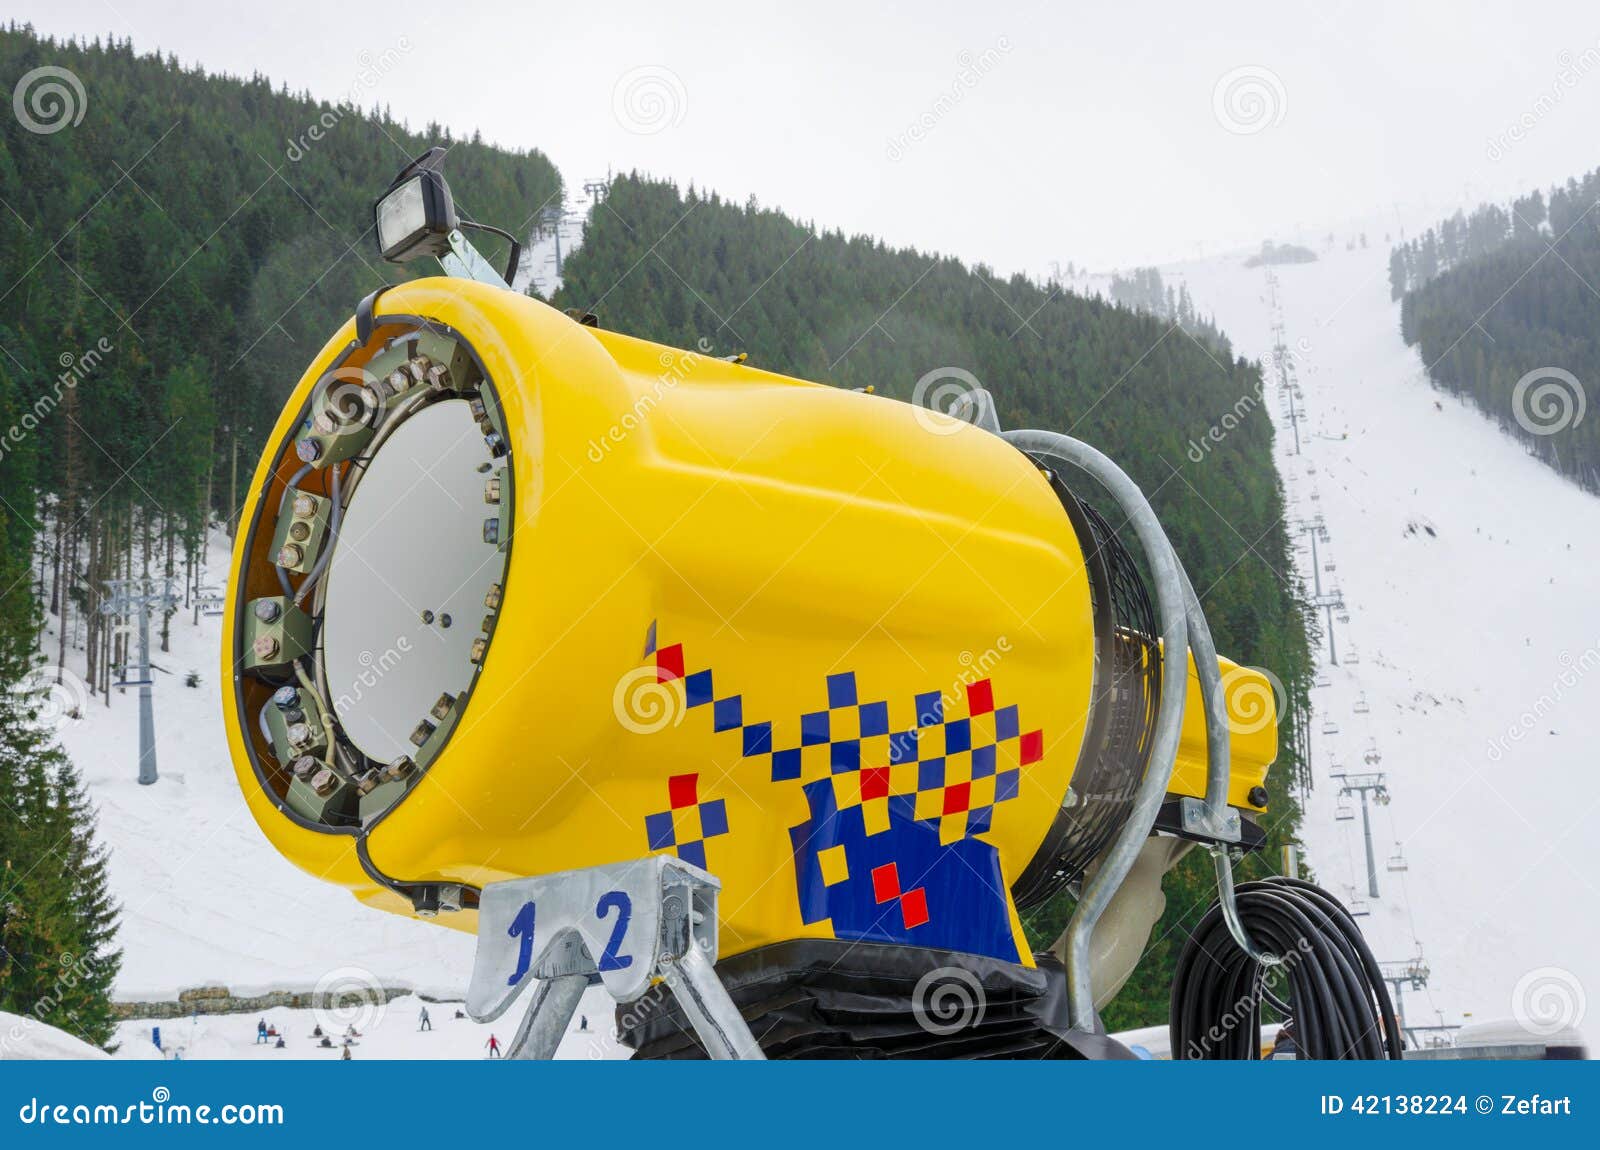 https://thumbs.dreamstime.com/z/snow-cannon-making-artificial-snow-snowmaking-production-forcing-water-pressurized-air-gun-ski-42138224.jpg